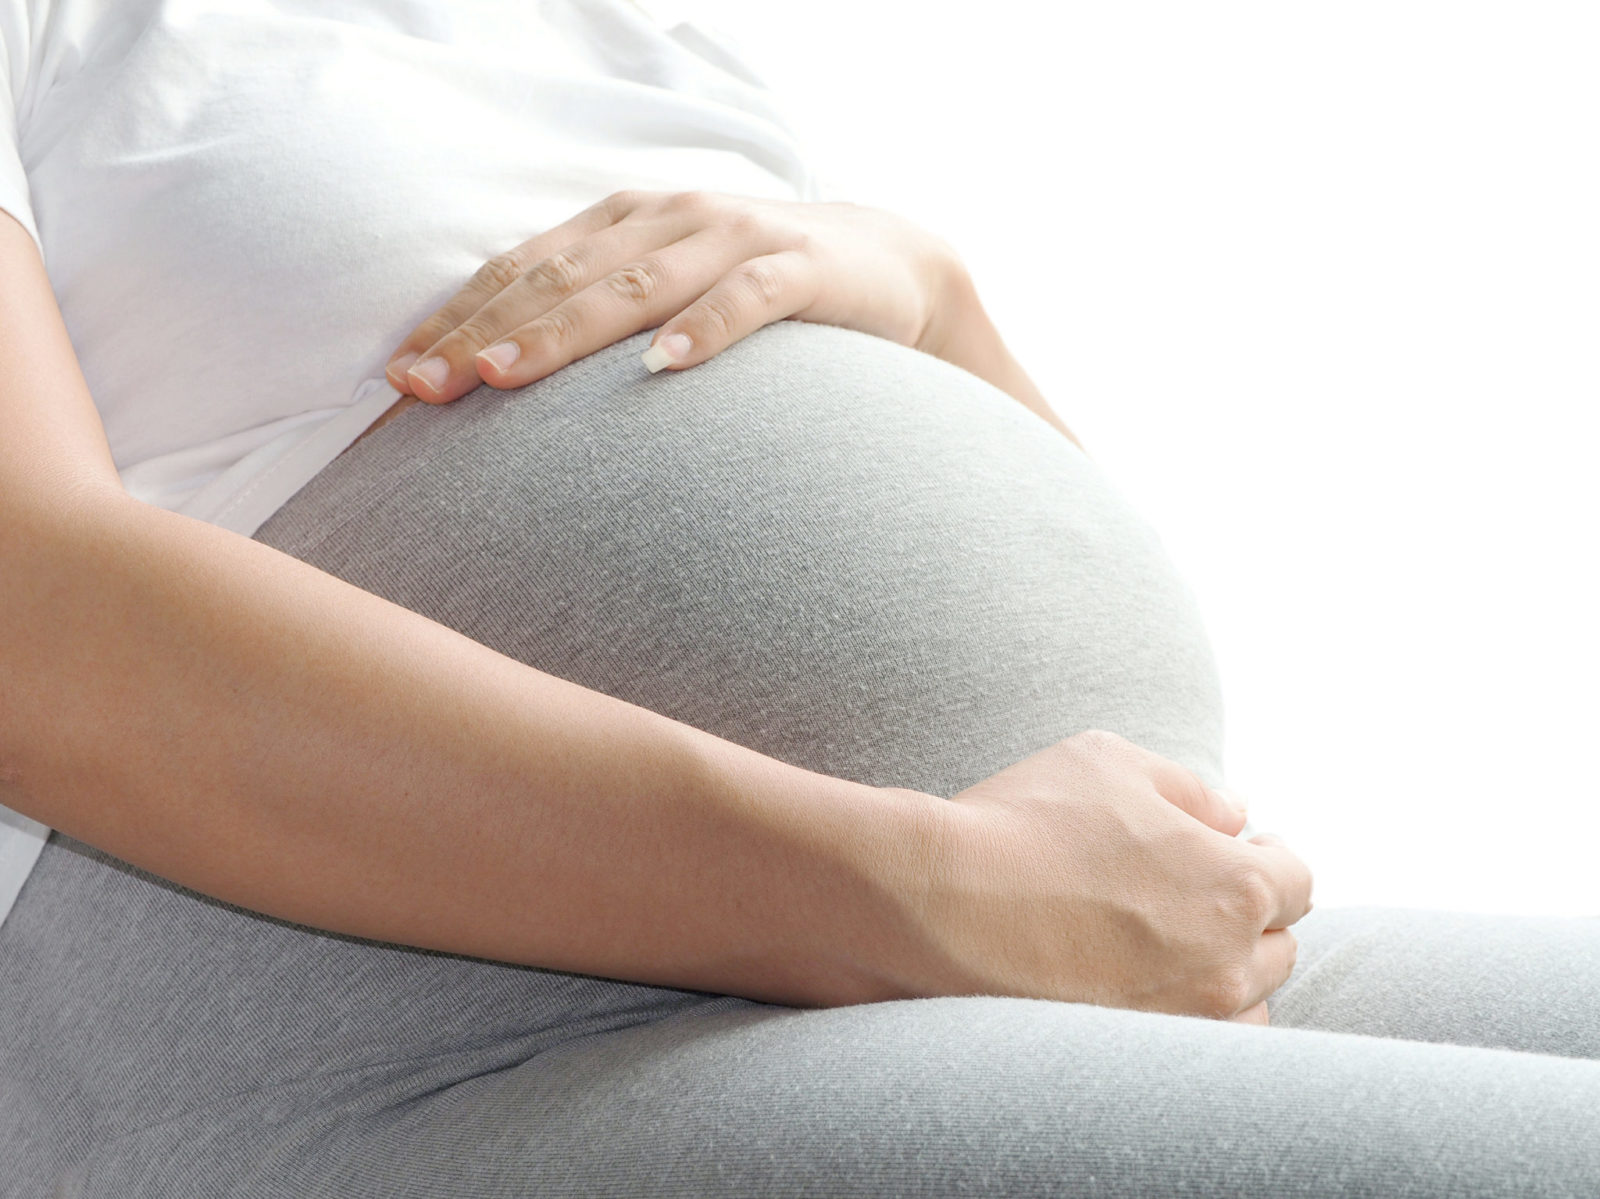 coping-with-swelling-during-pregnancy